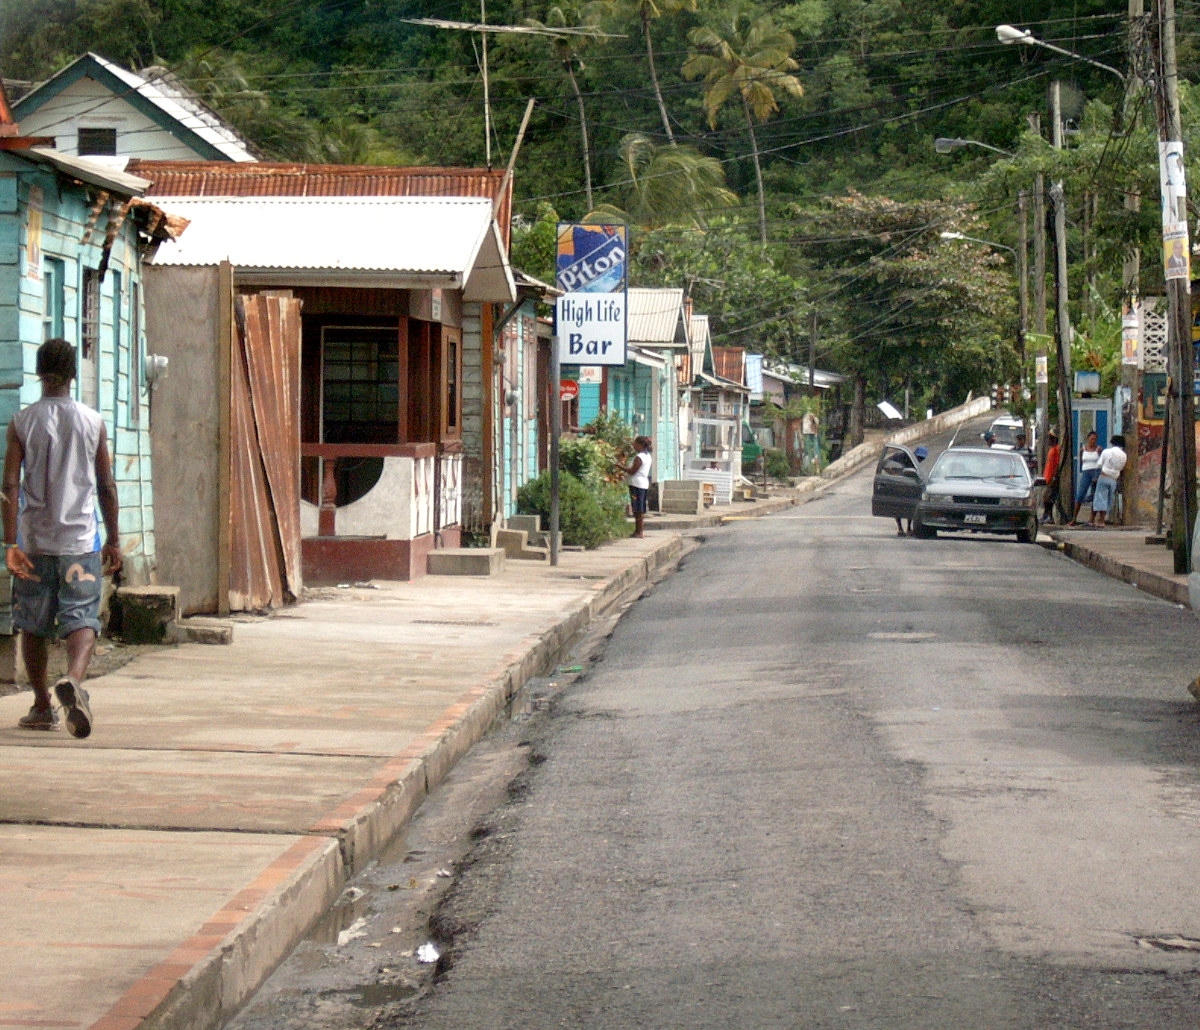 The people and language of Saint Lucia